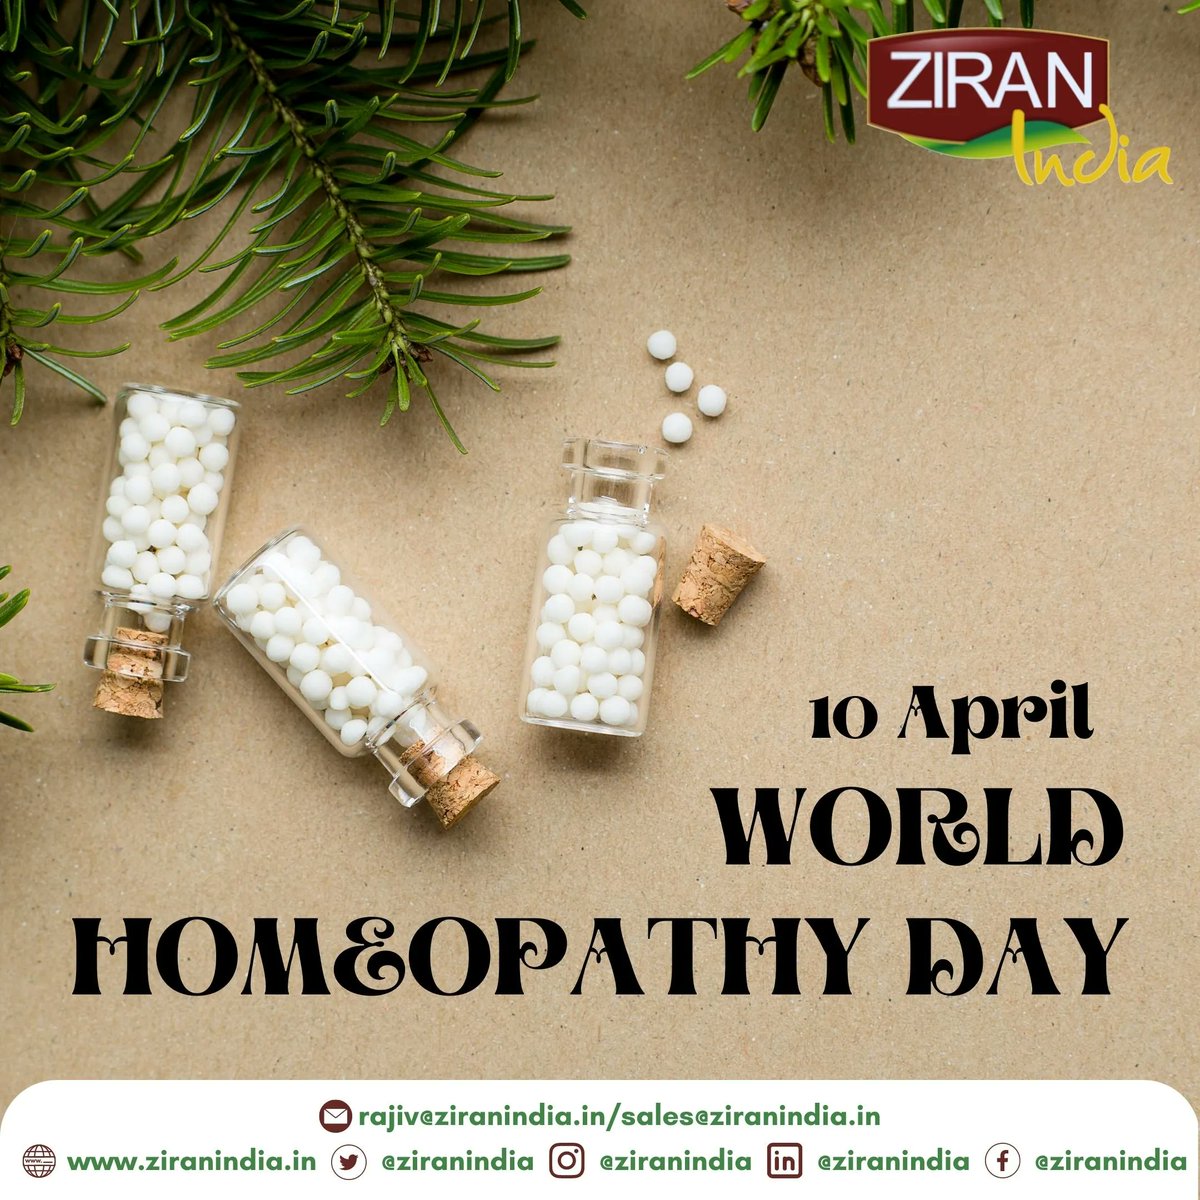 The World Homoeopathy Day is observed every year on April 10 to commemorate the Birthday of Dr. Hahnemann, the Founder of Homoeopathy. 

#HOMEOPATHYDAY #homeopathic #WorldHomeopathyDay_2023 #WorldHomoeopathyDay